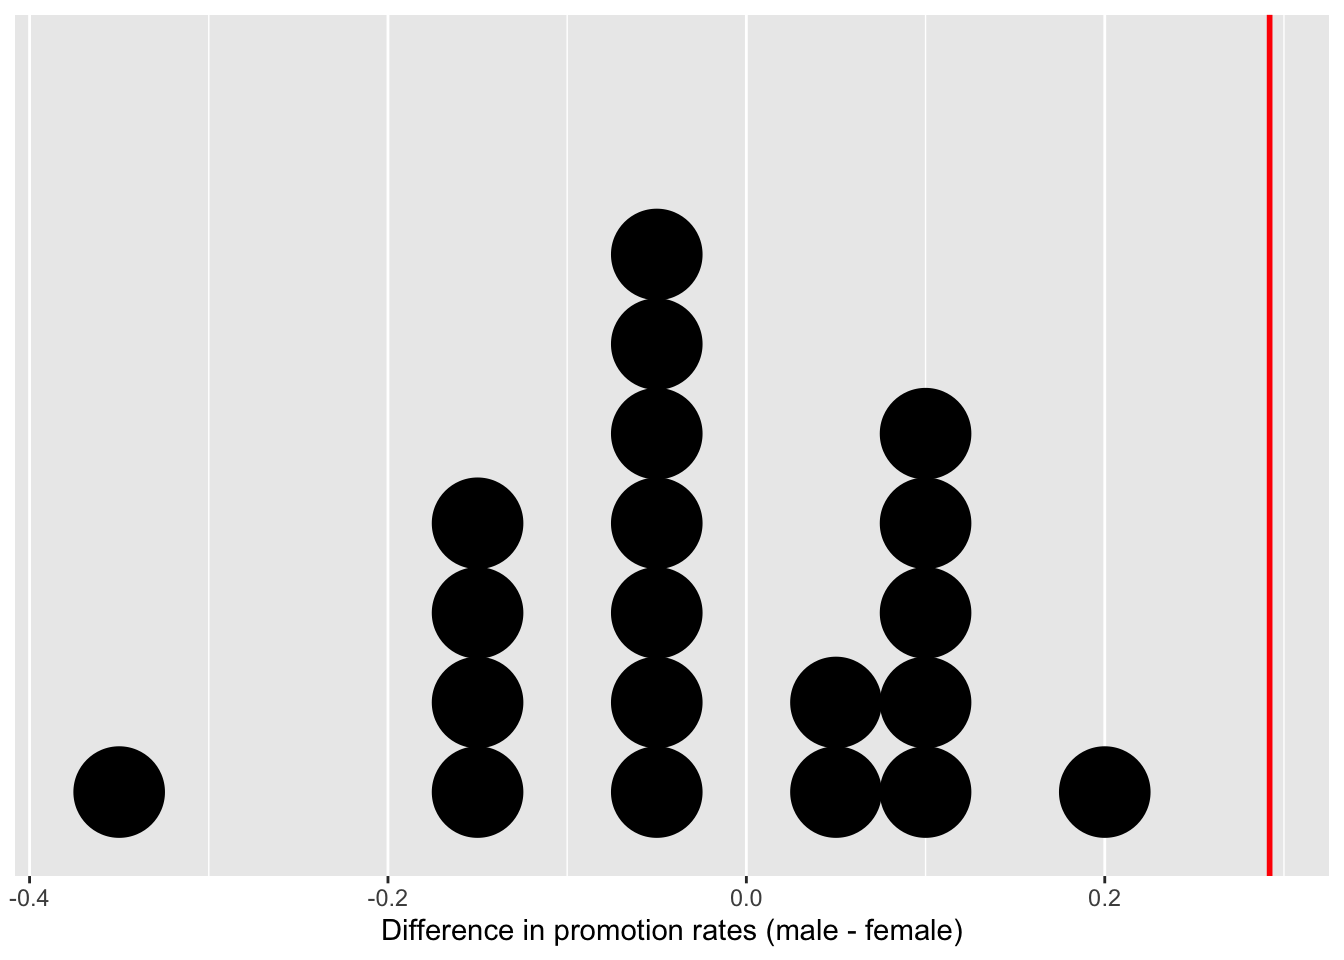 Distribution of differences in promotion rates (20 samples).